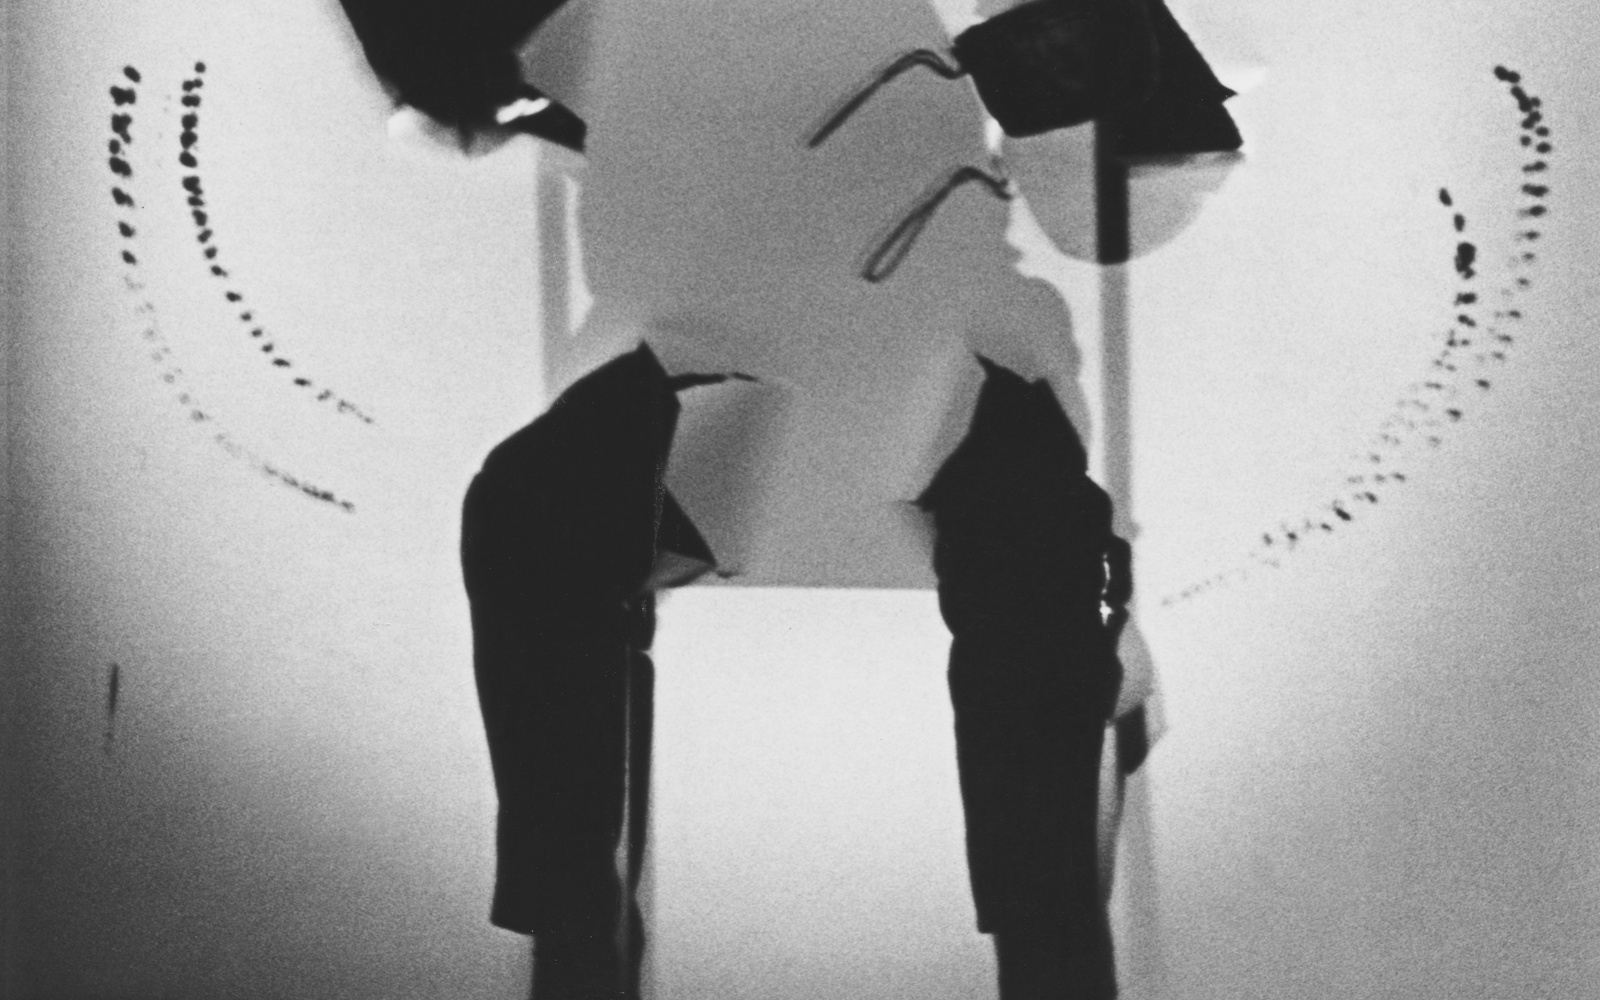  Black and white image of a silhouette sitting on a chair